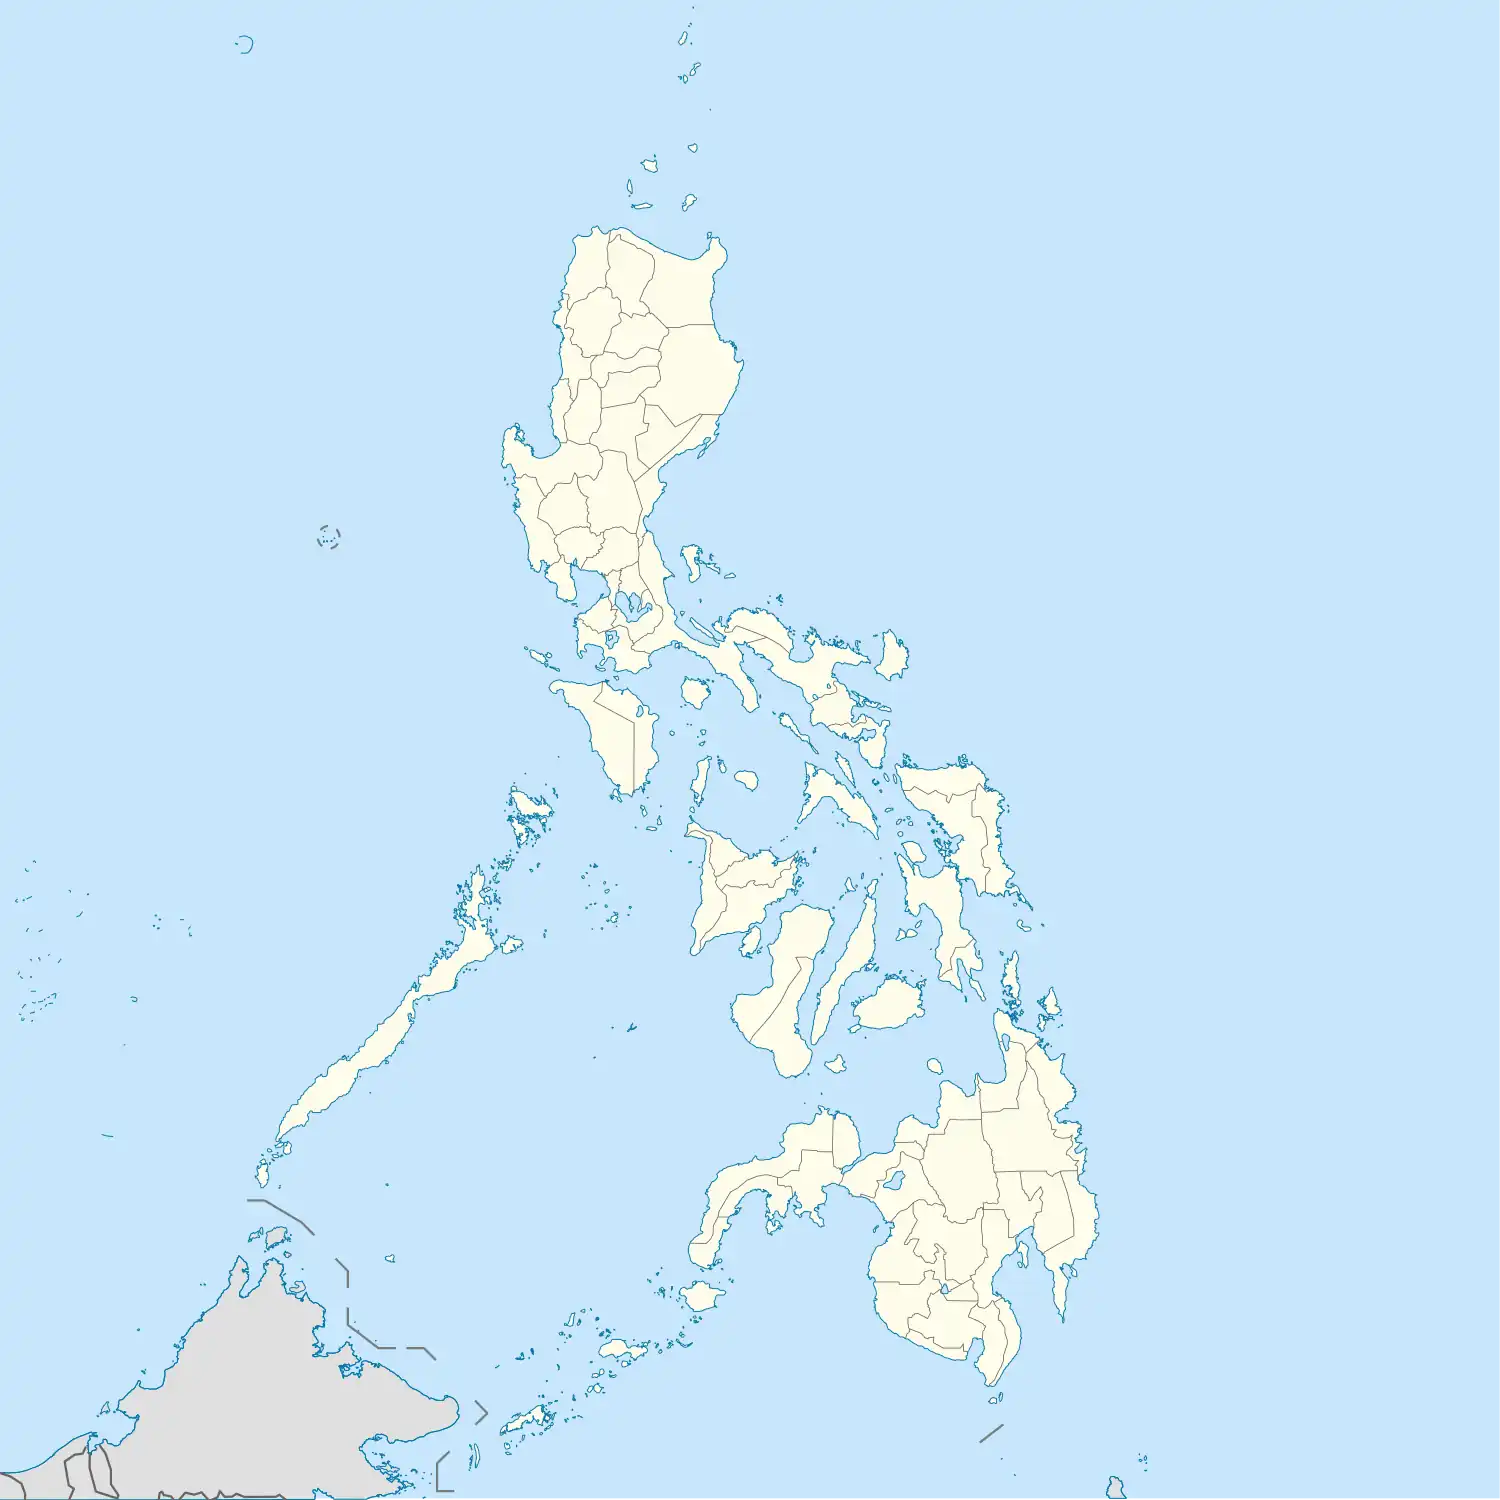 Palapag is located in Philippines